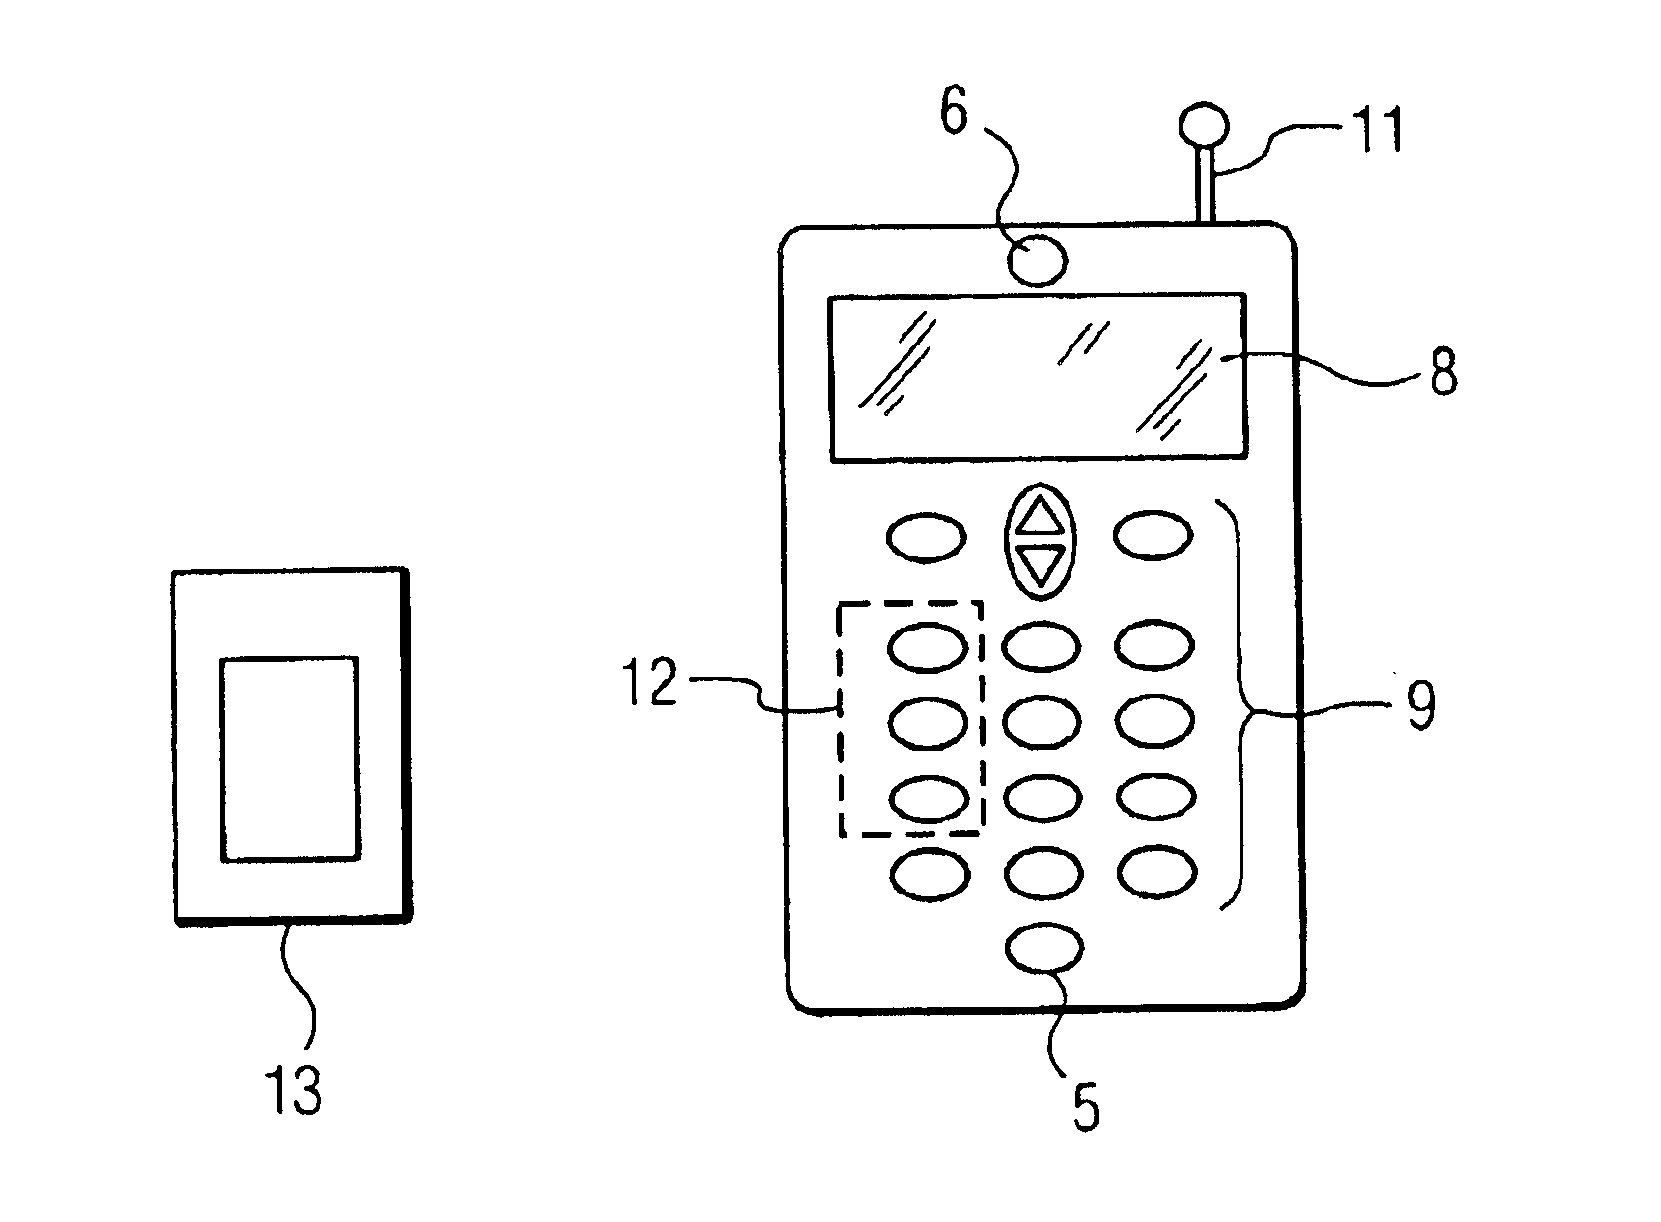 Anti-theft protection for a radiotelephony device